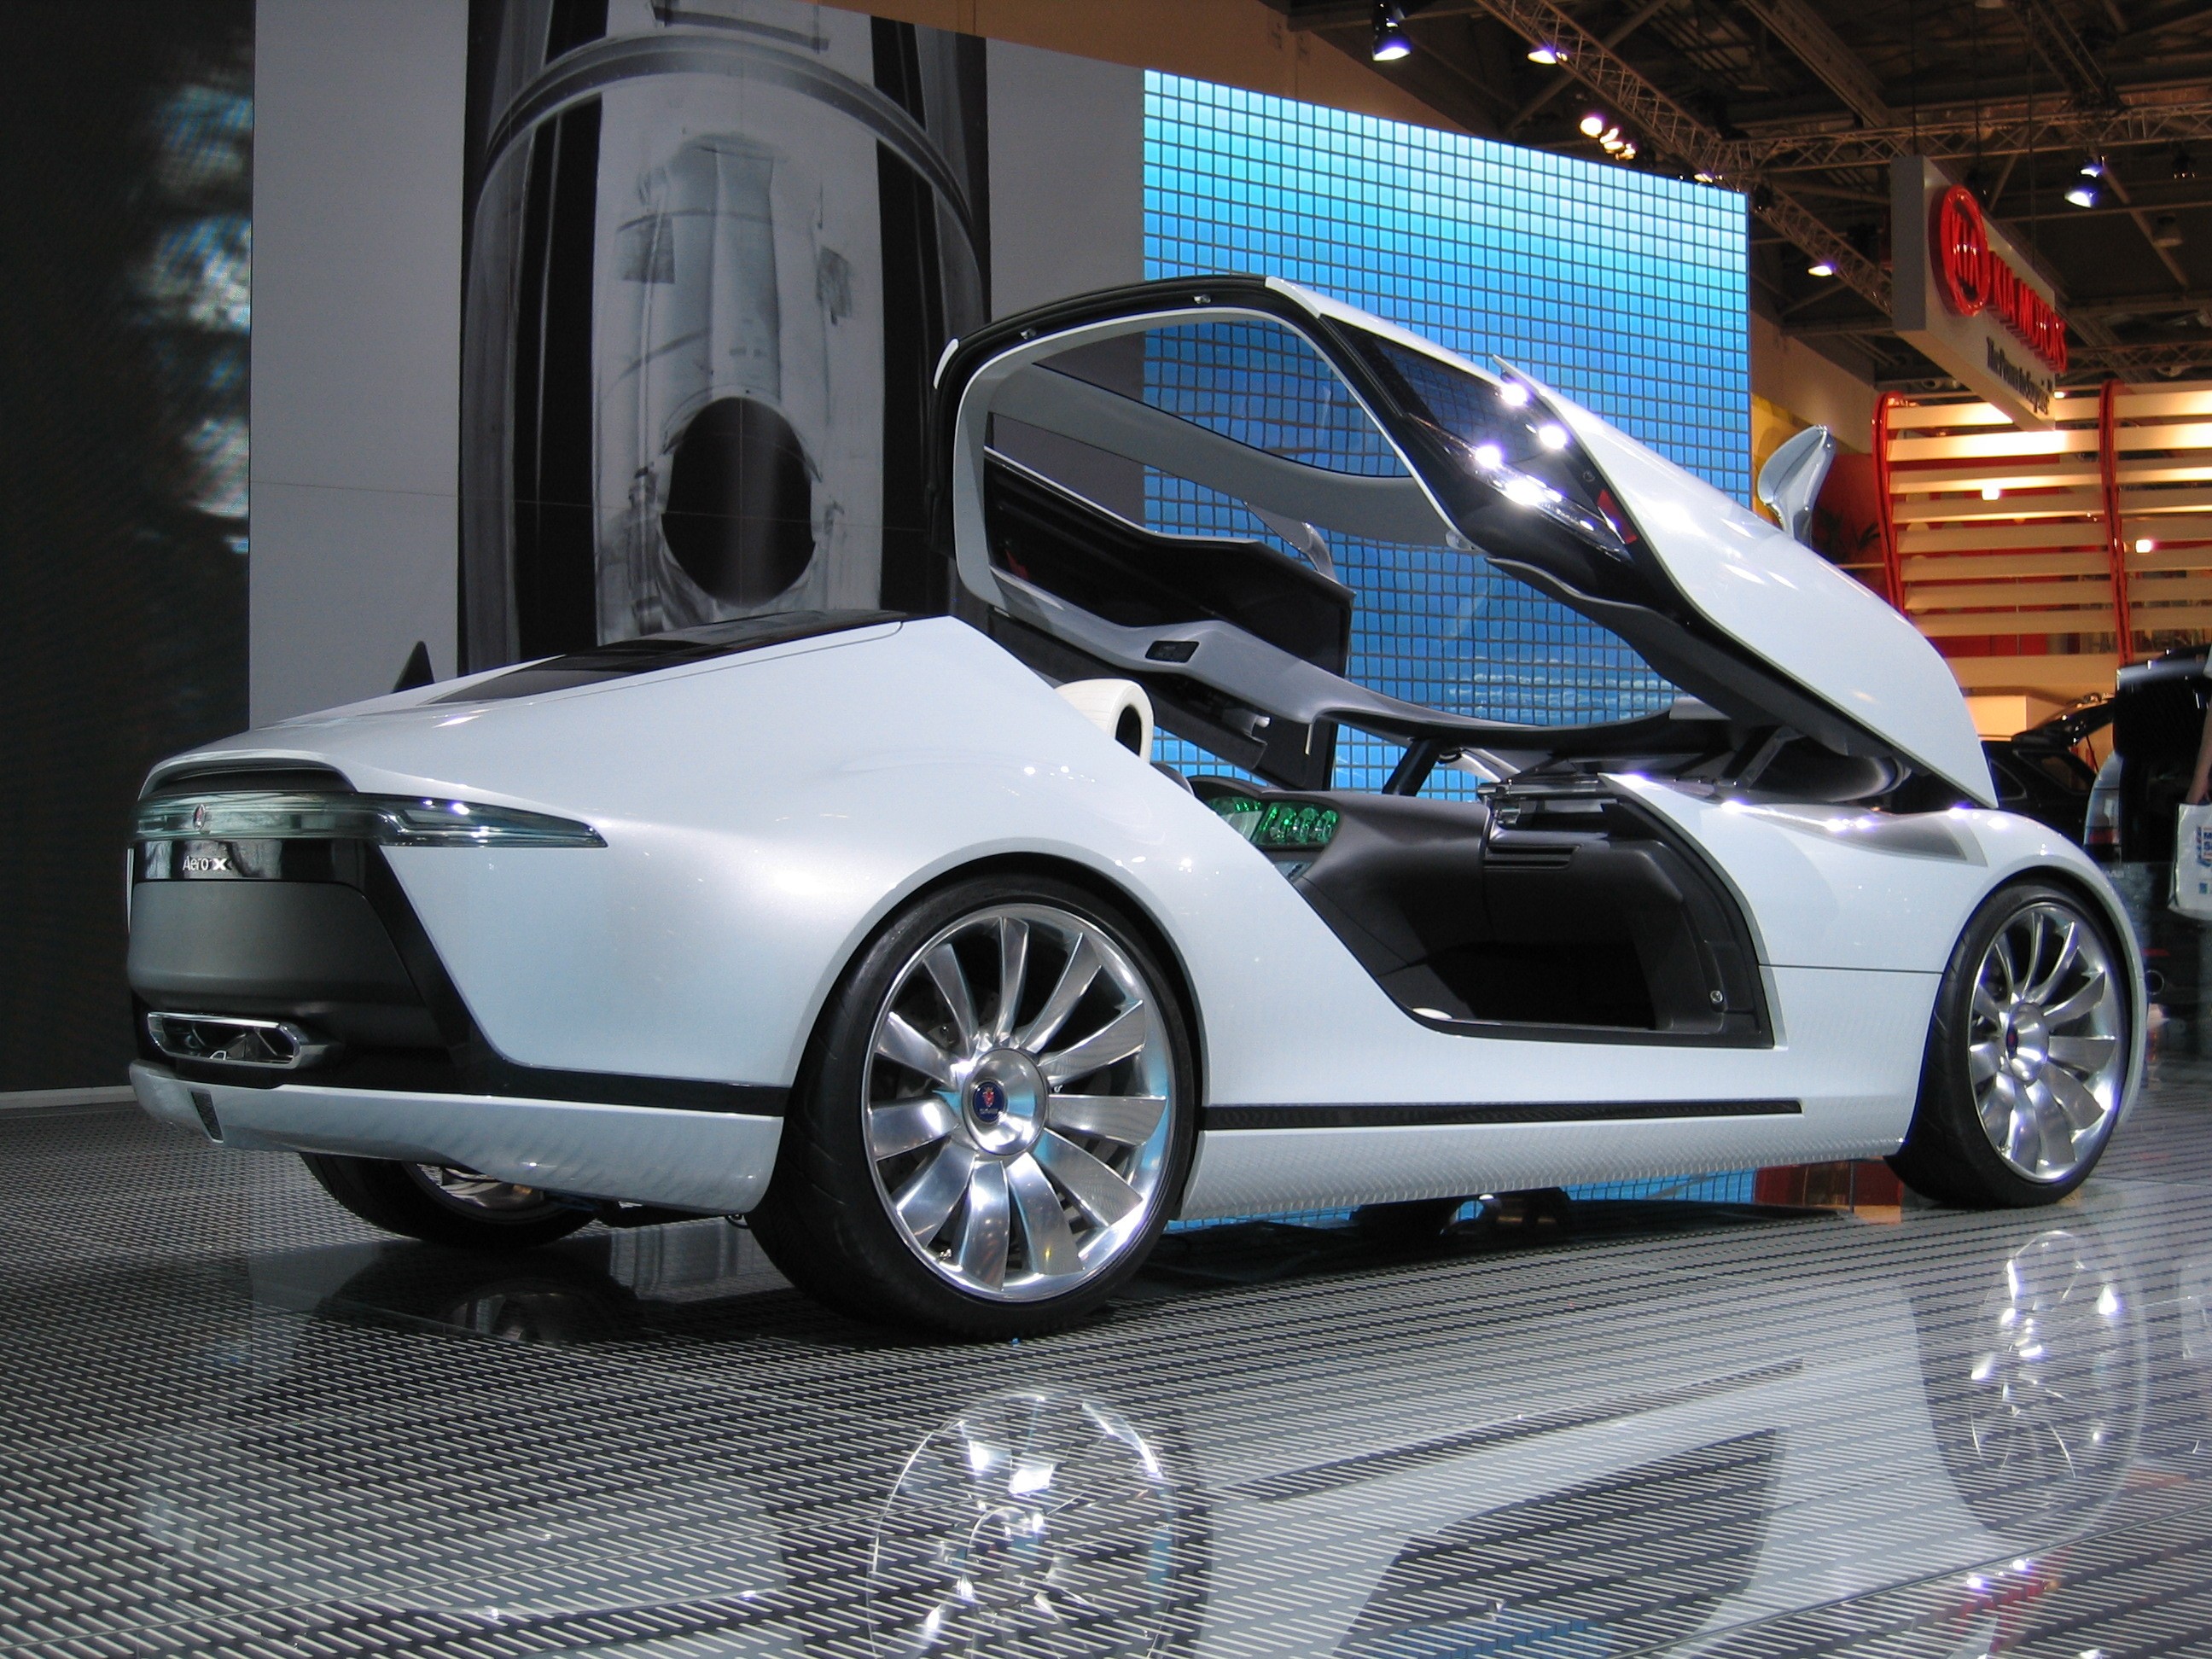 What-You-Need-To-Know-About-The-World's-Coolest-Concept-Car-Mercedes-Avtr